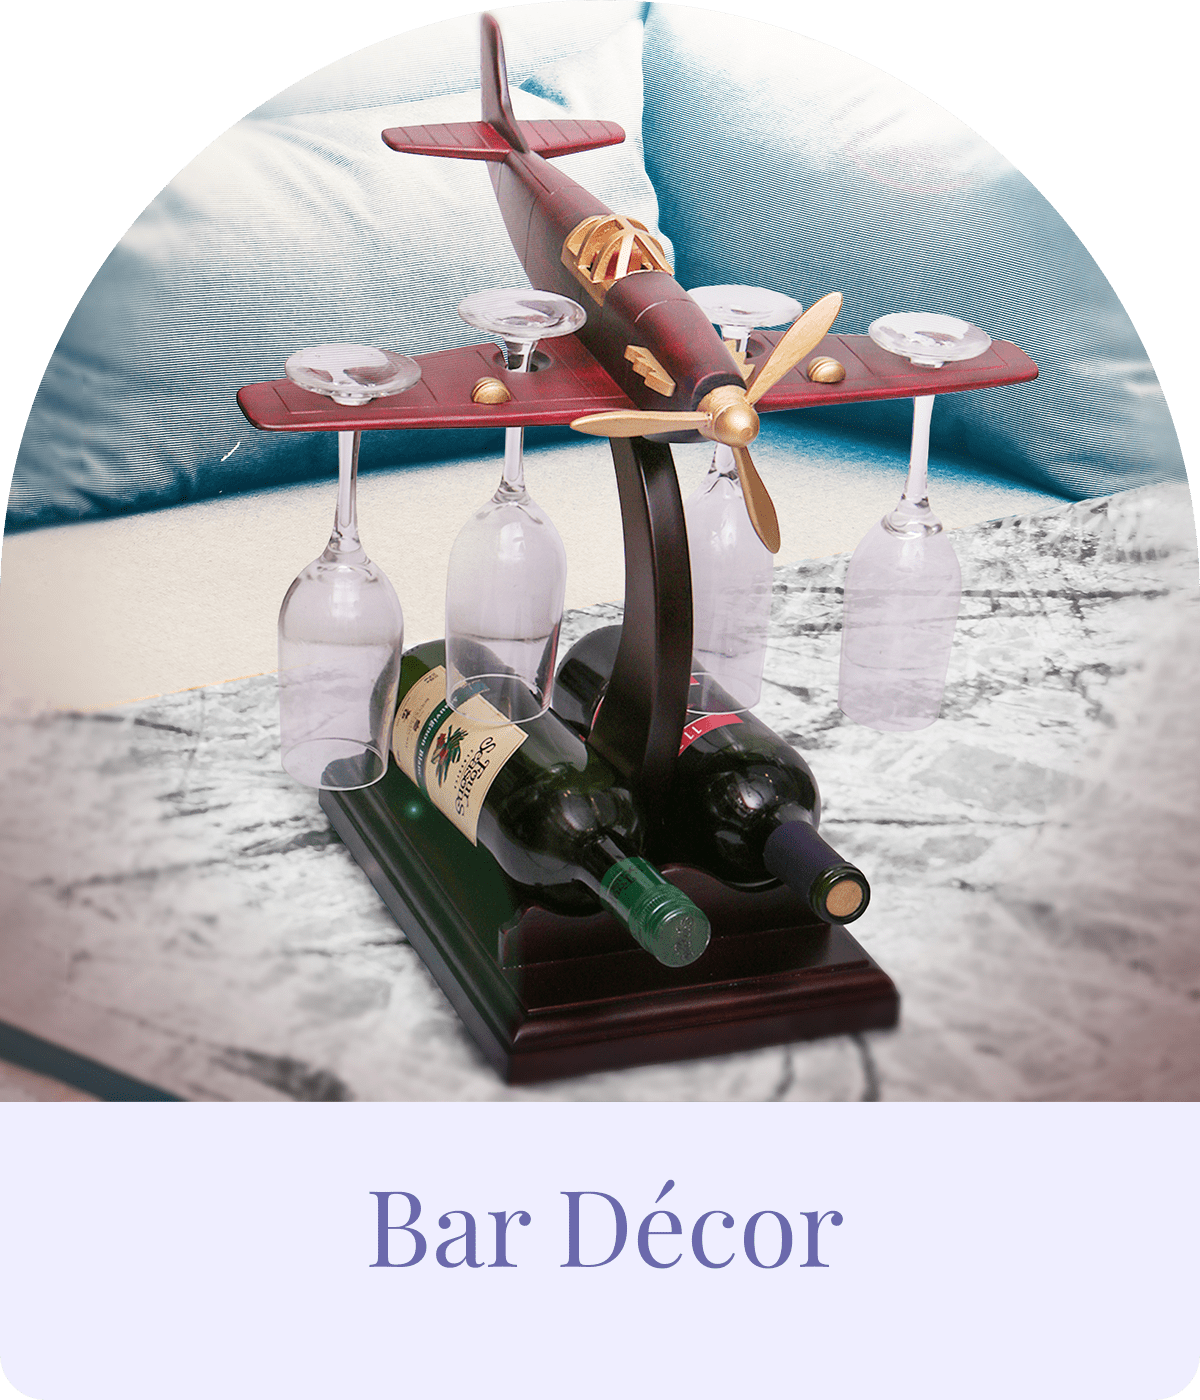 Discover our 'Bar Decor' collection, offering a selection of stylish and functional decor items to elevate your home bar and create a welcoming drinking ambiance